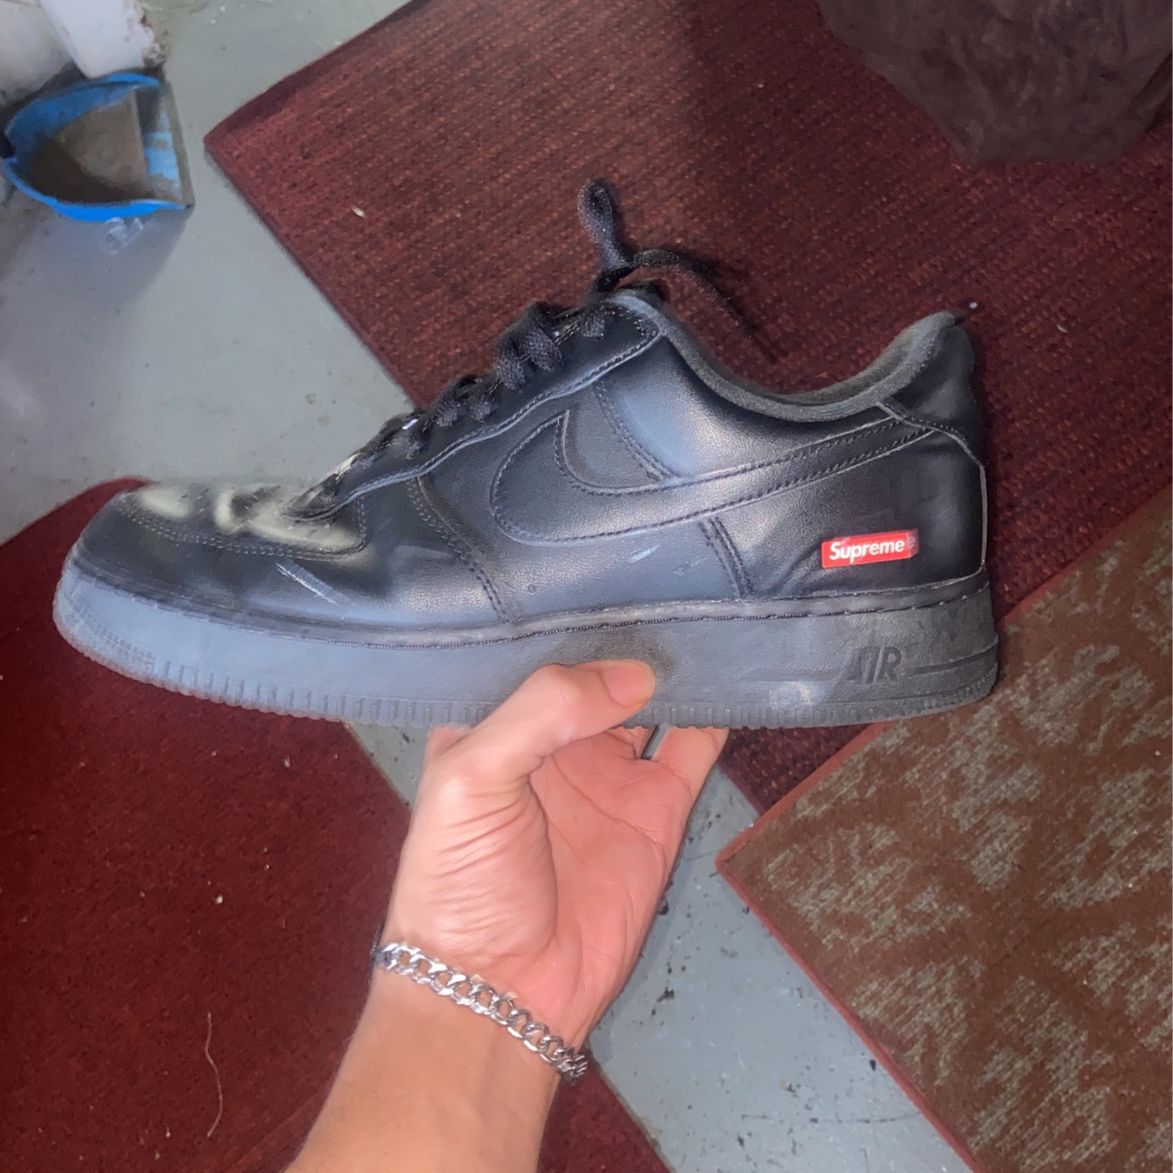 Nike Air Force 1 Black WMNS Size 5.5 And 6 for Sale in Parma, OH - OfferUp